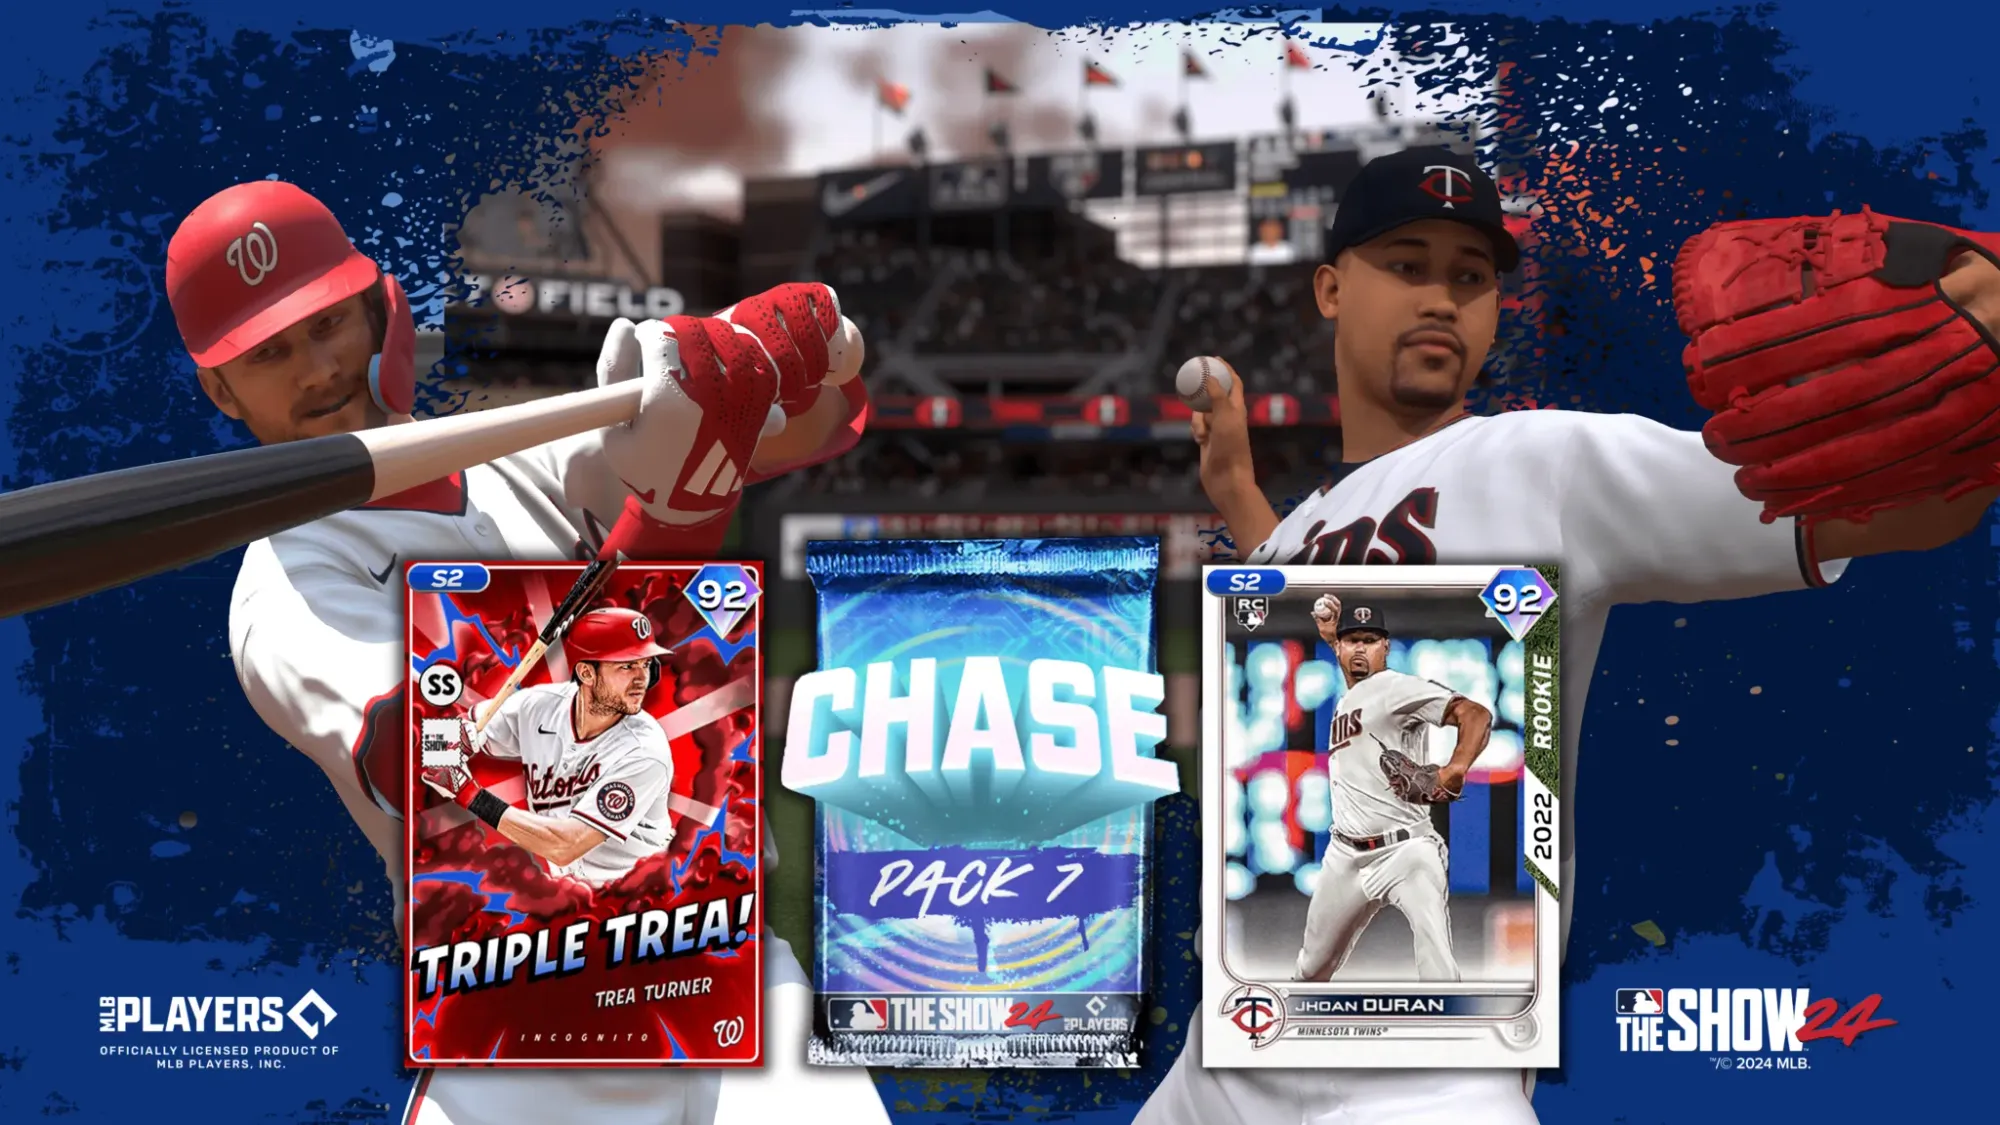 CHASE PACK 7